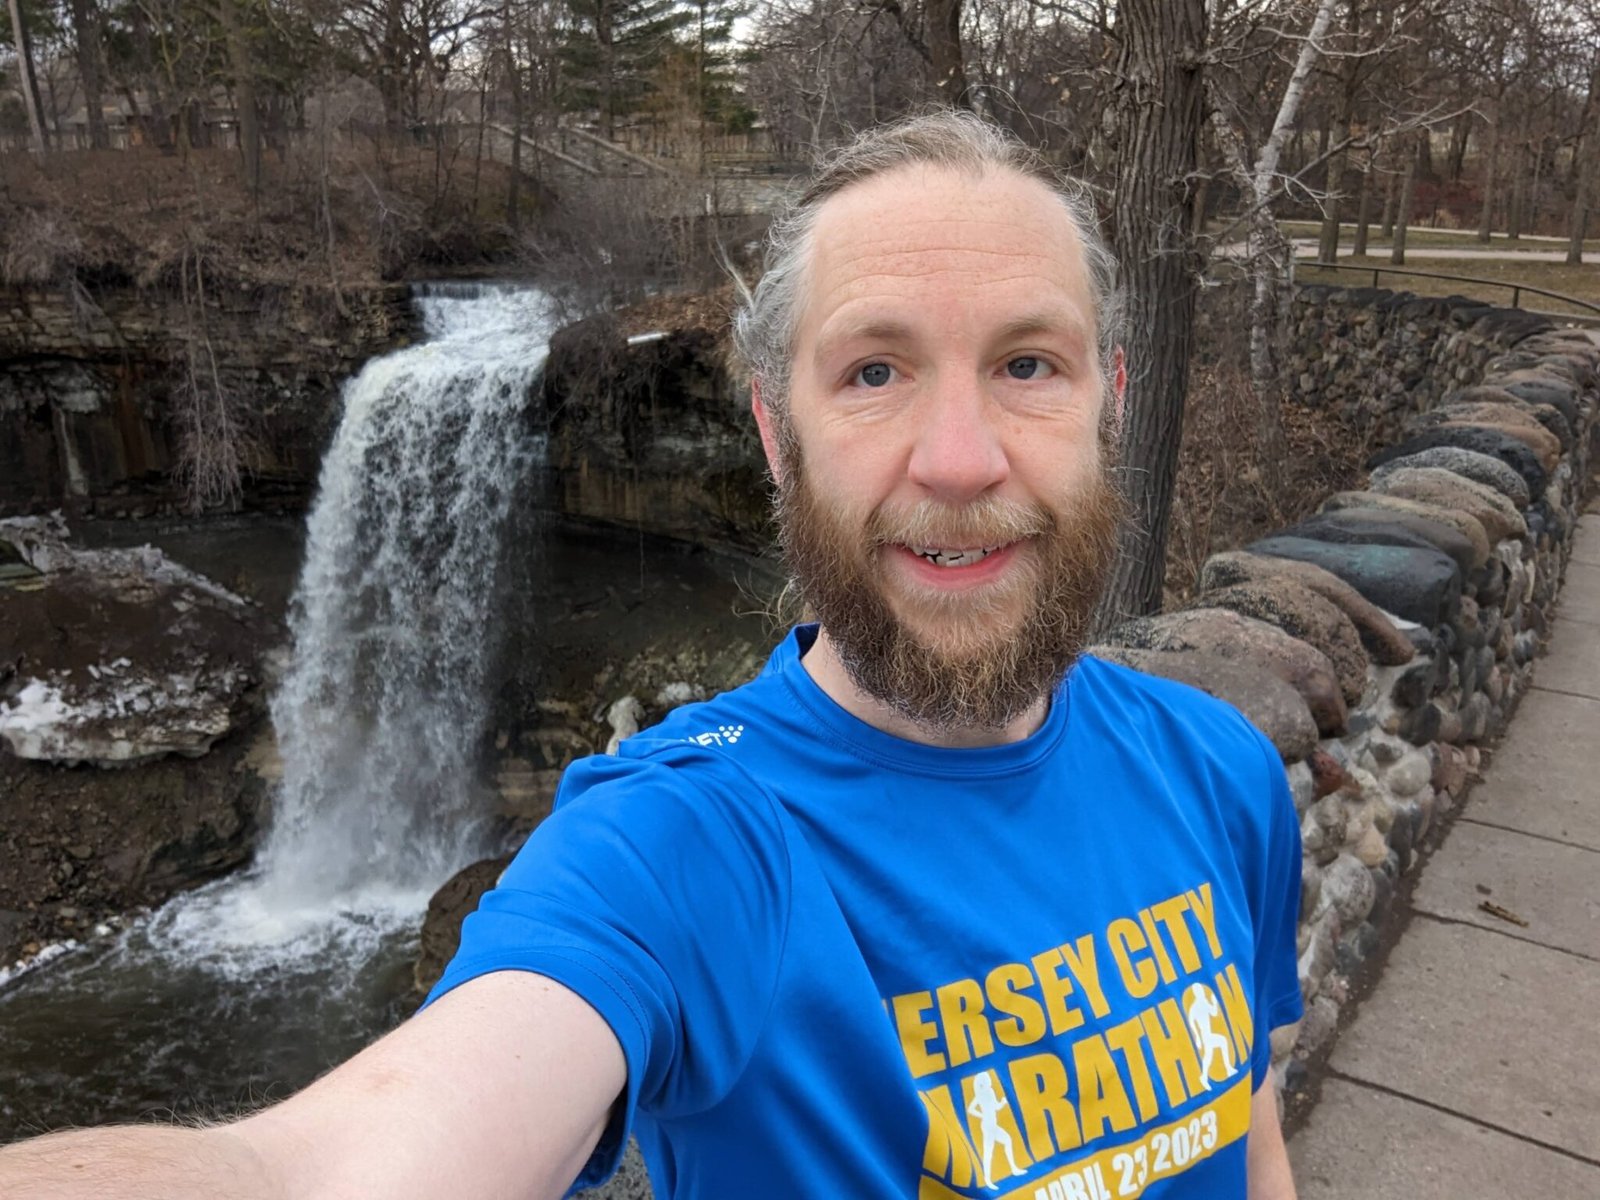 Me, running by the Minnehaha Falls in Minneapolis, MN.